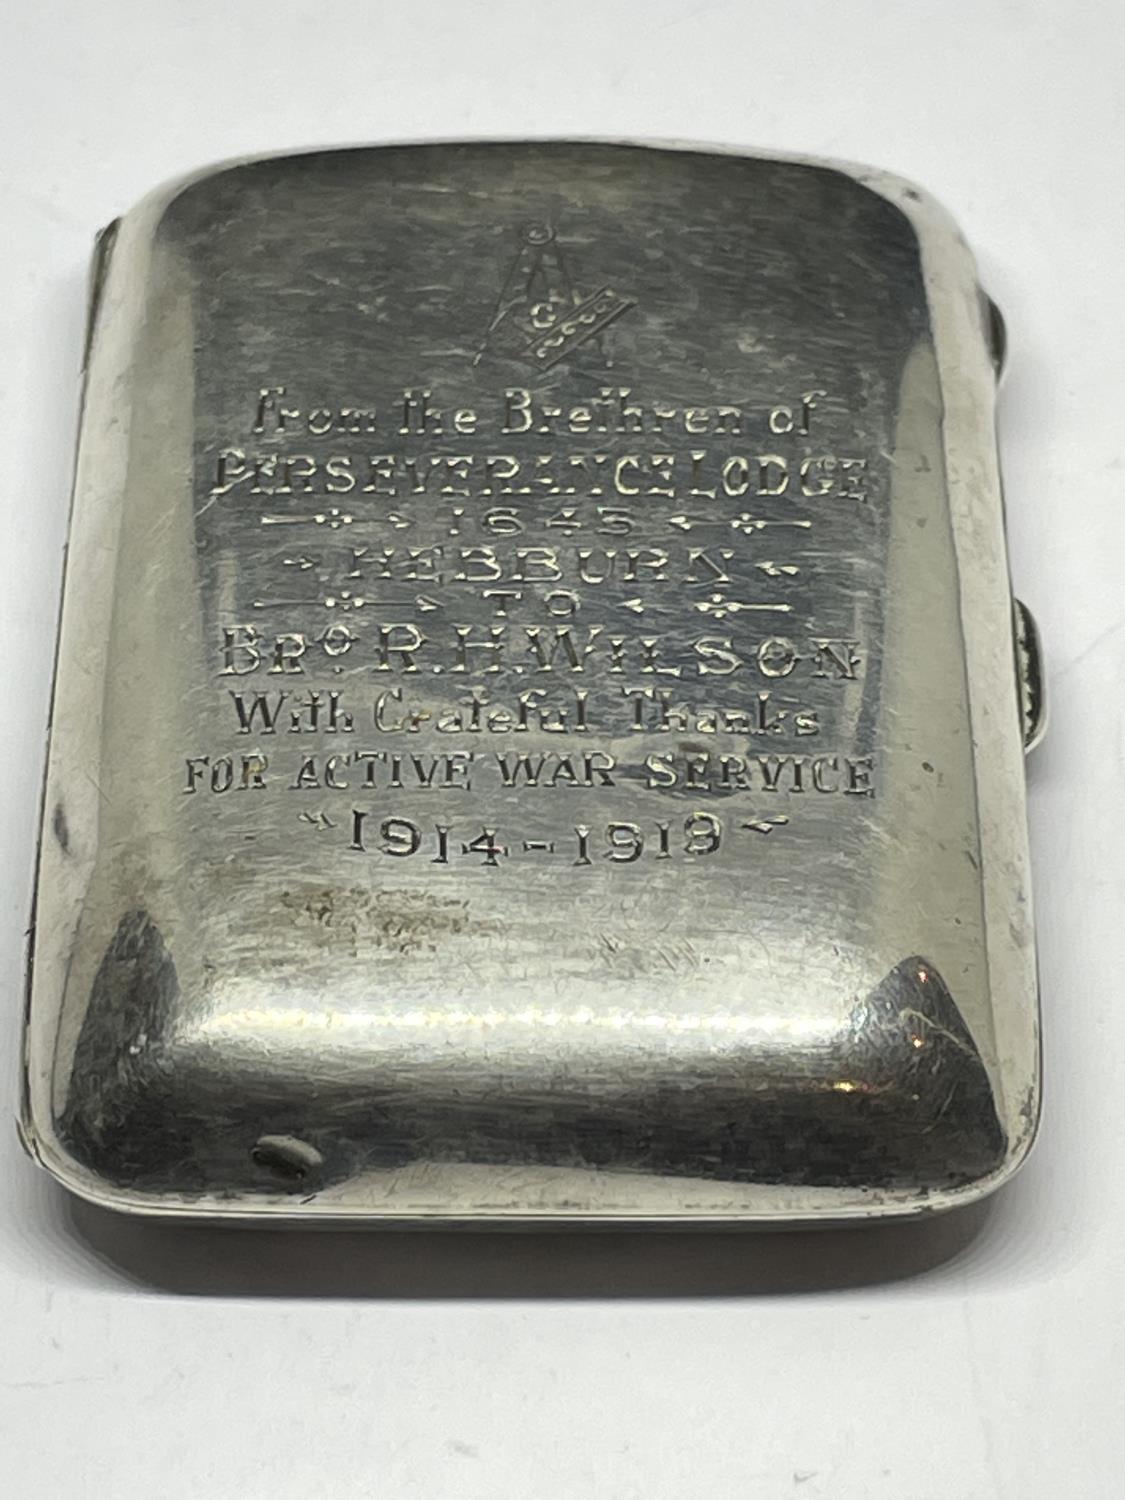 A HALLMARKED CHESTER CIGARETTE CASE WITH ENGRAVING RELATING TO A MASONIC LODGE MEMBER AND THEIR